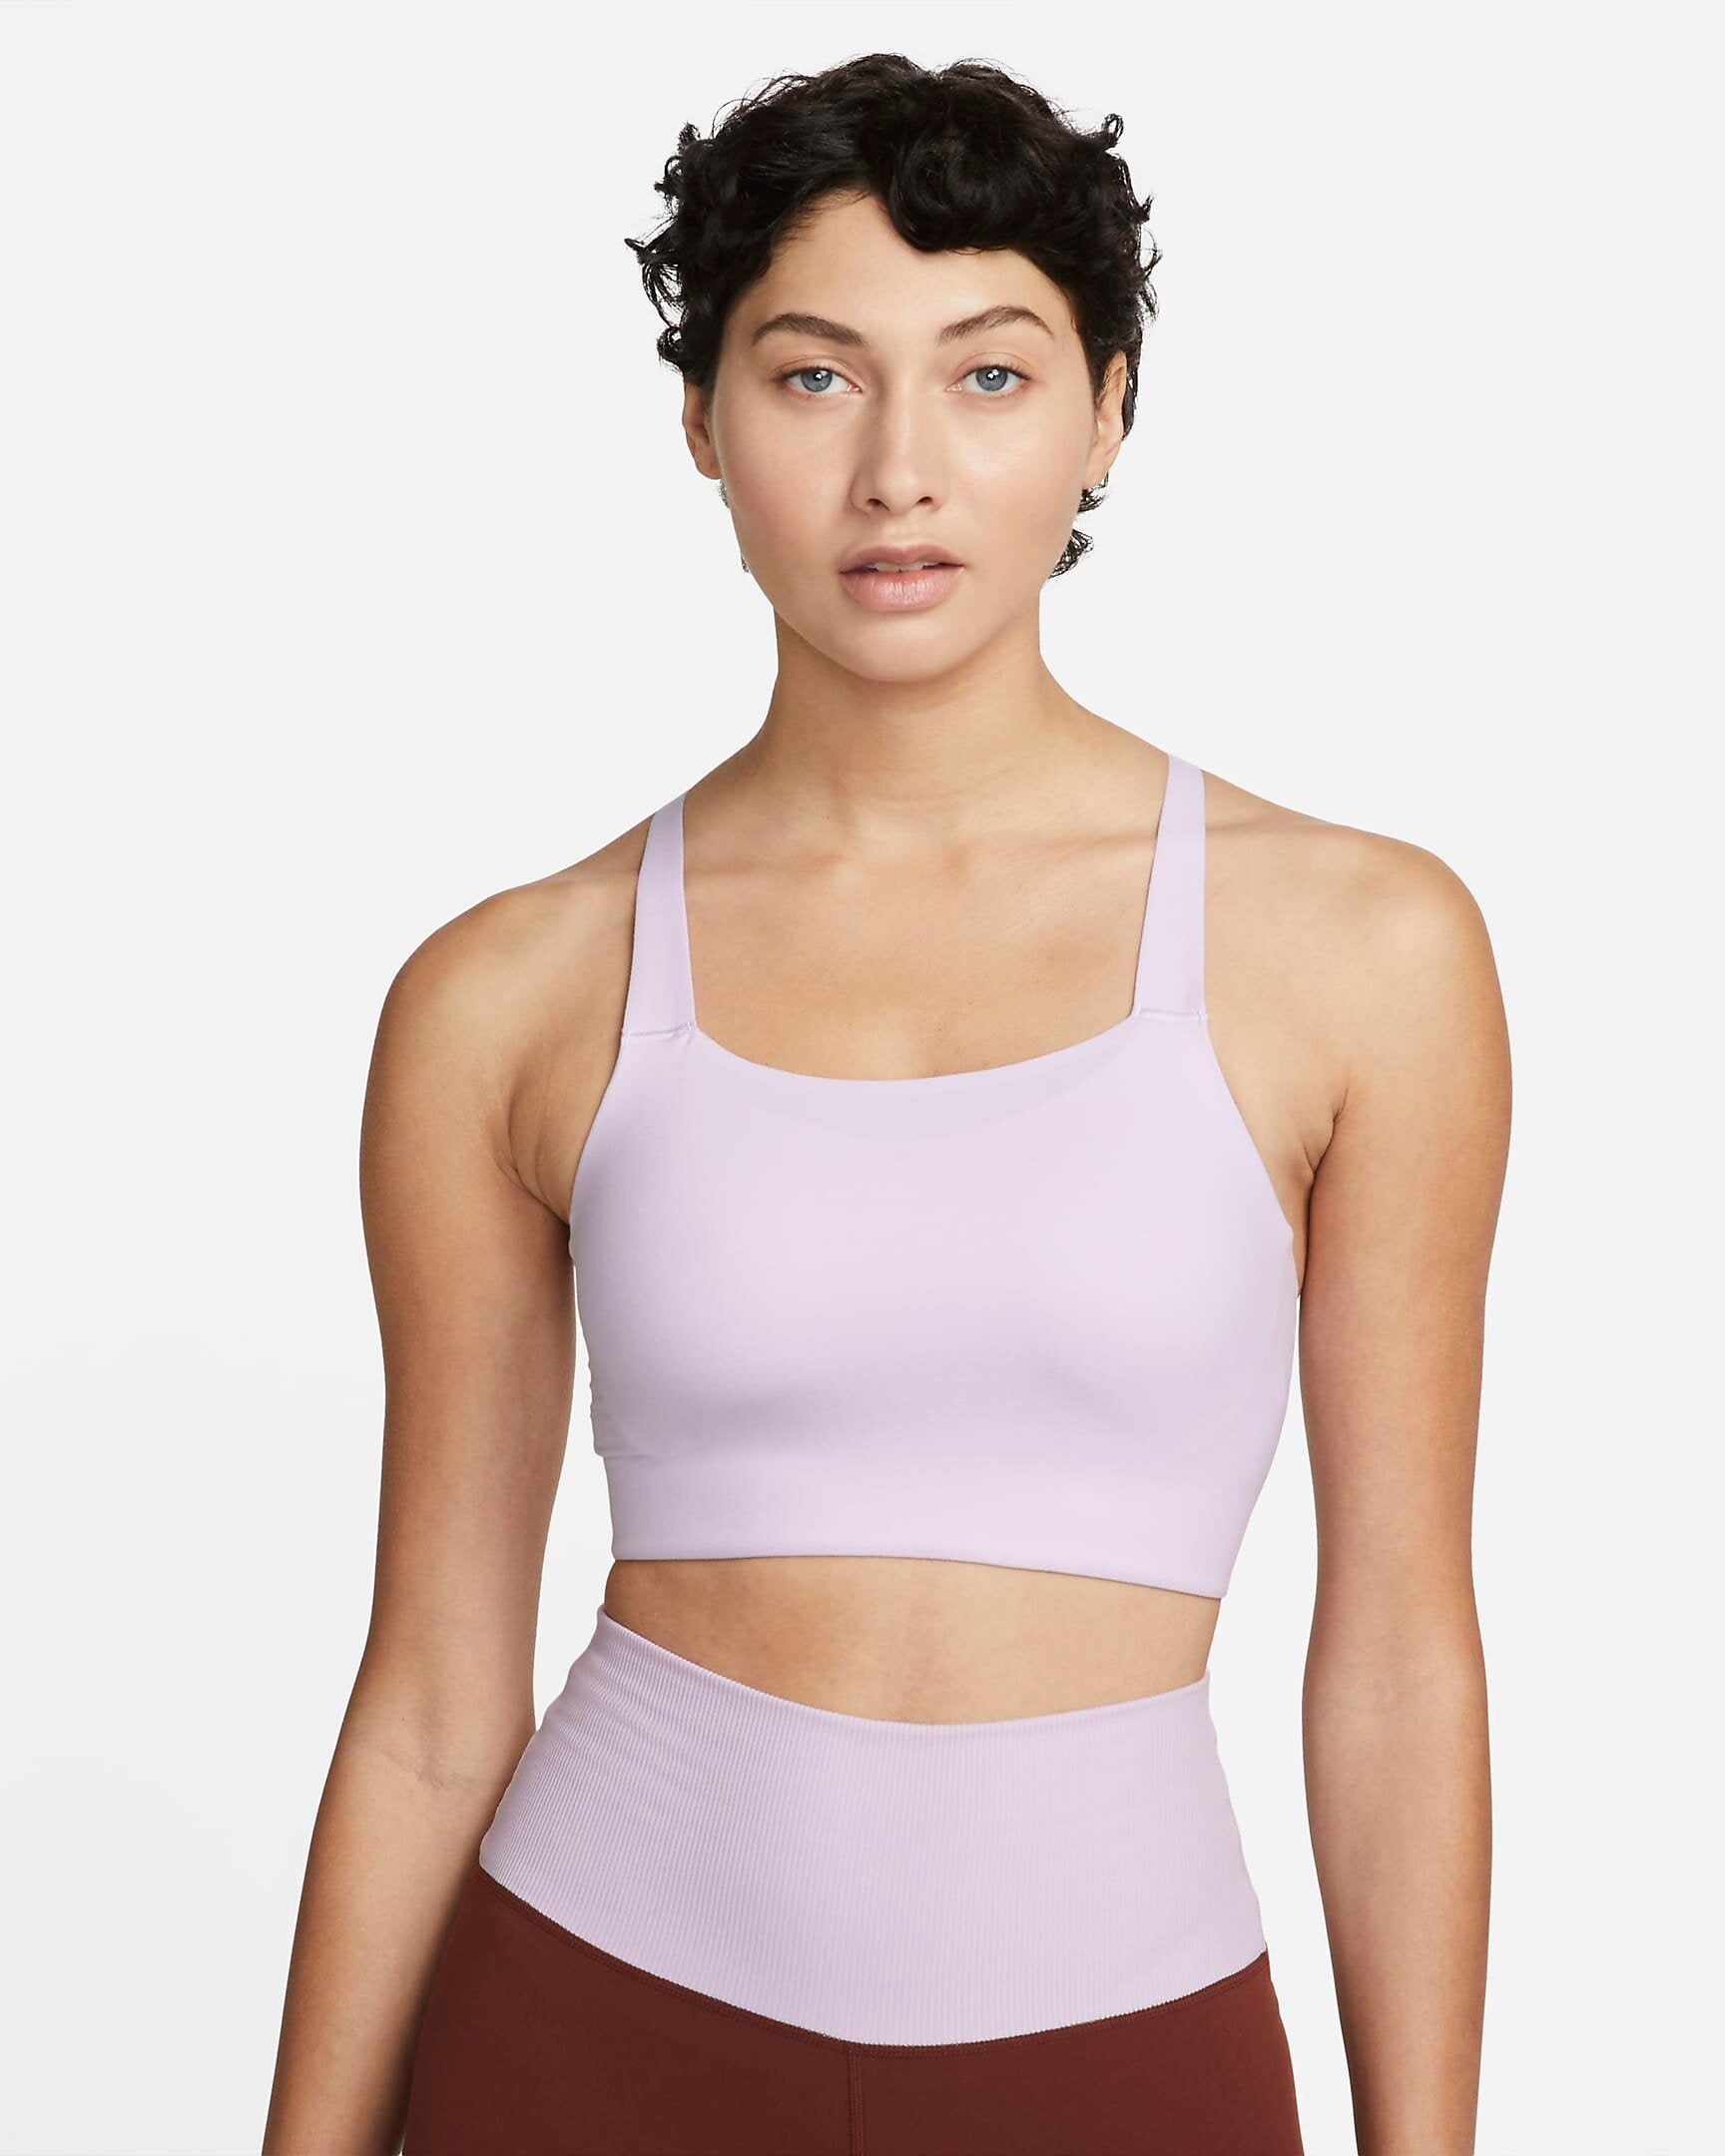 Nike Swoosh Women's Medium-Support 1-Piece Pad Sports Bra - The Nike Swoosh  Sports Bra gives you classic coverage and medium support for